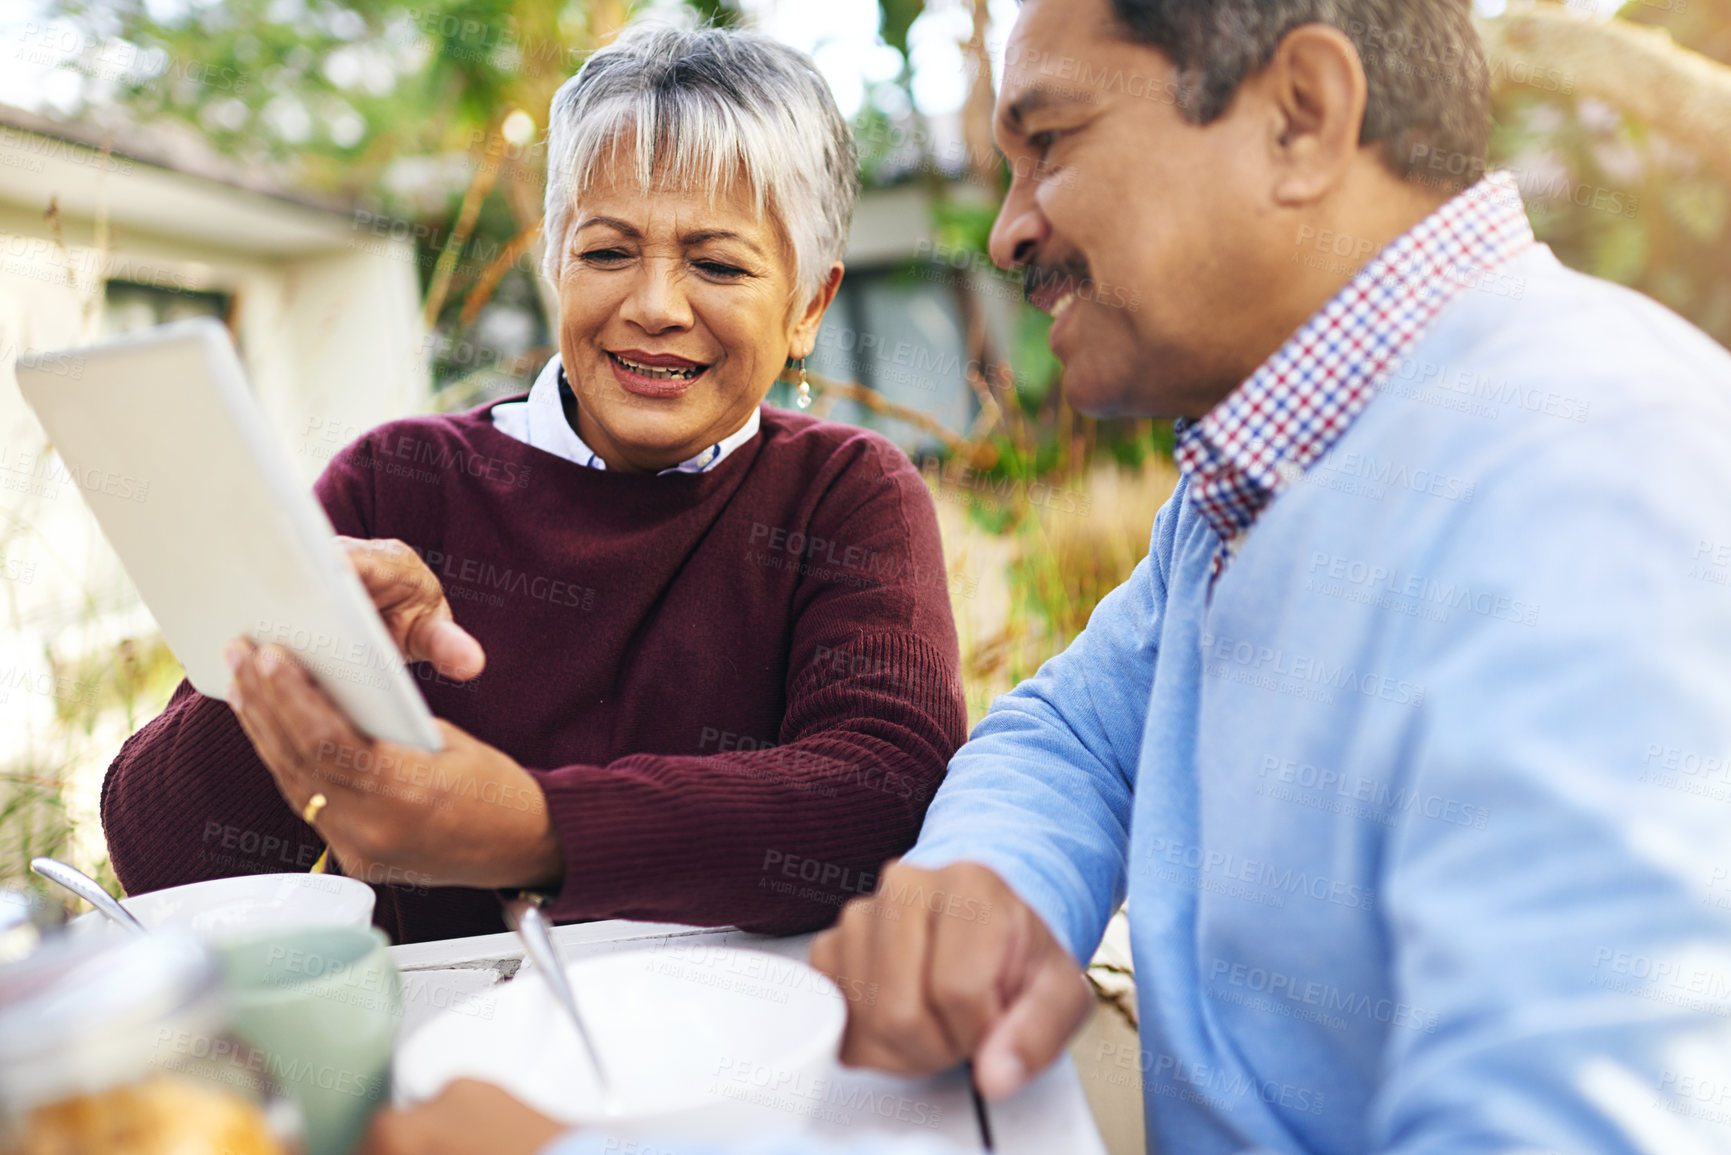 Buy stock photo Shot of an older couple using a digital tablet during a leisurely breakfast outdoors